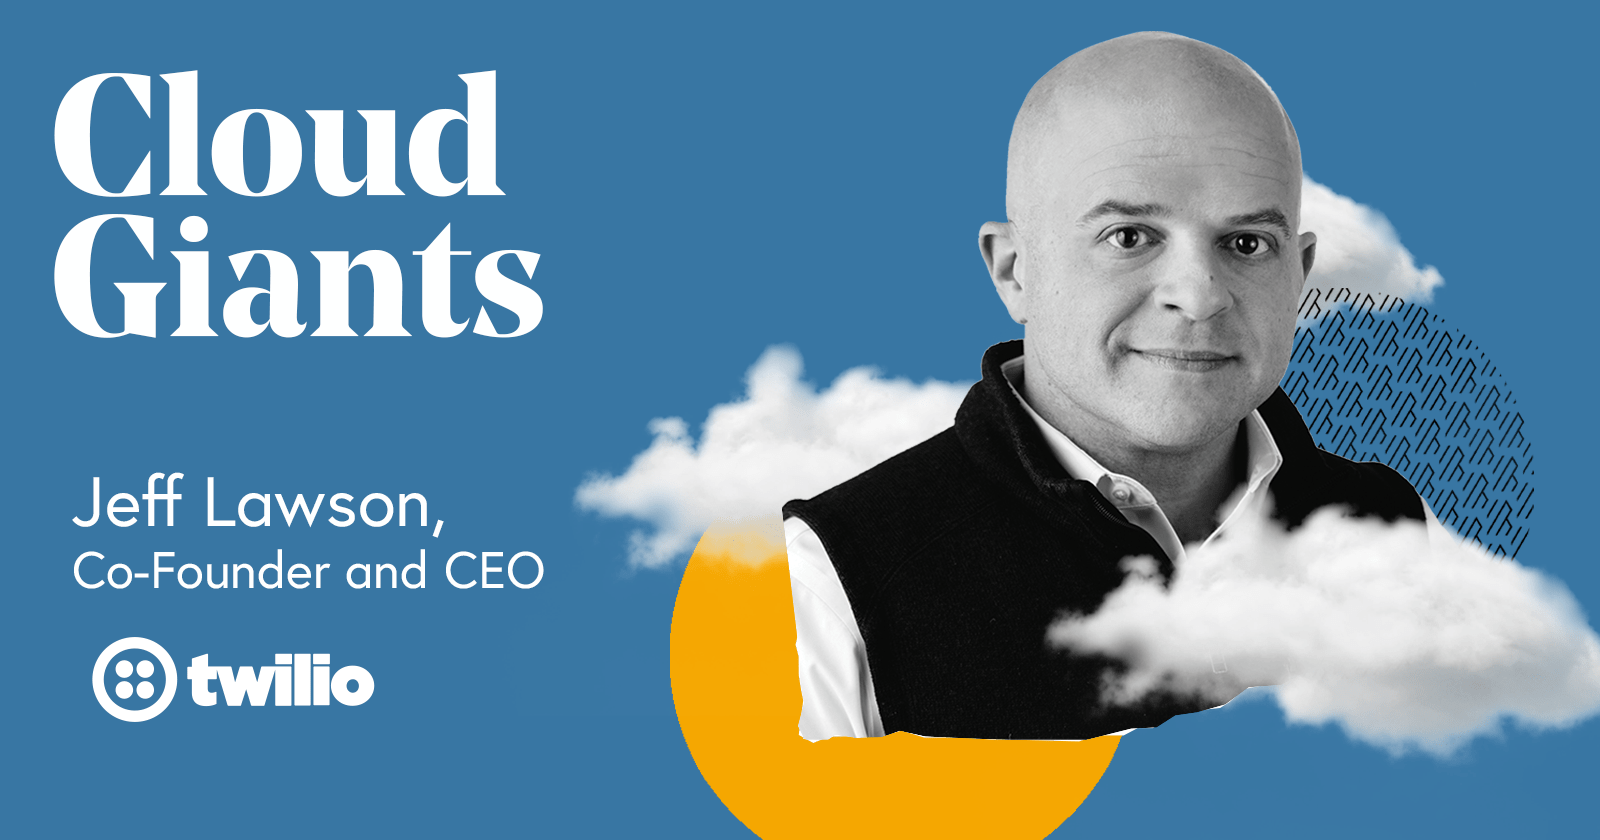 Cloud Giants with Jeff Lawson Co-Founder and CEO Twilio